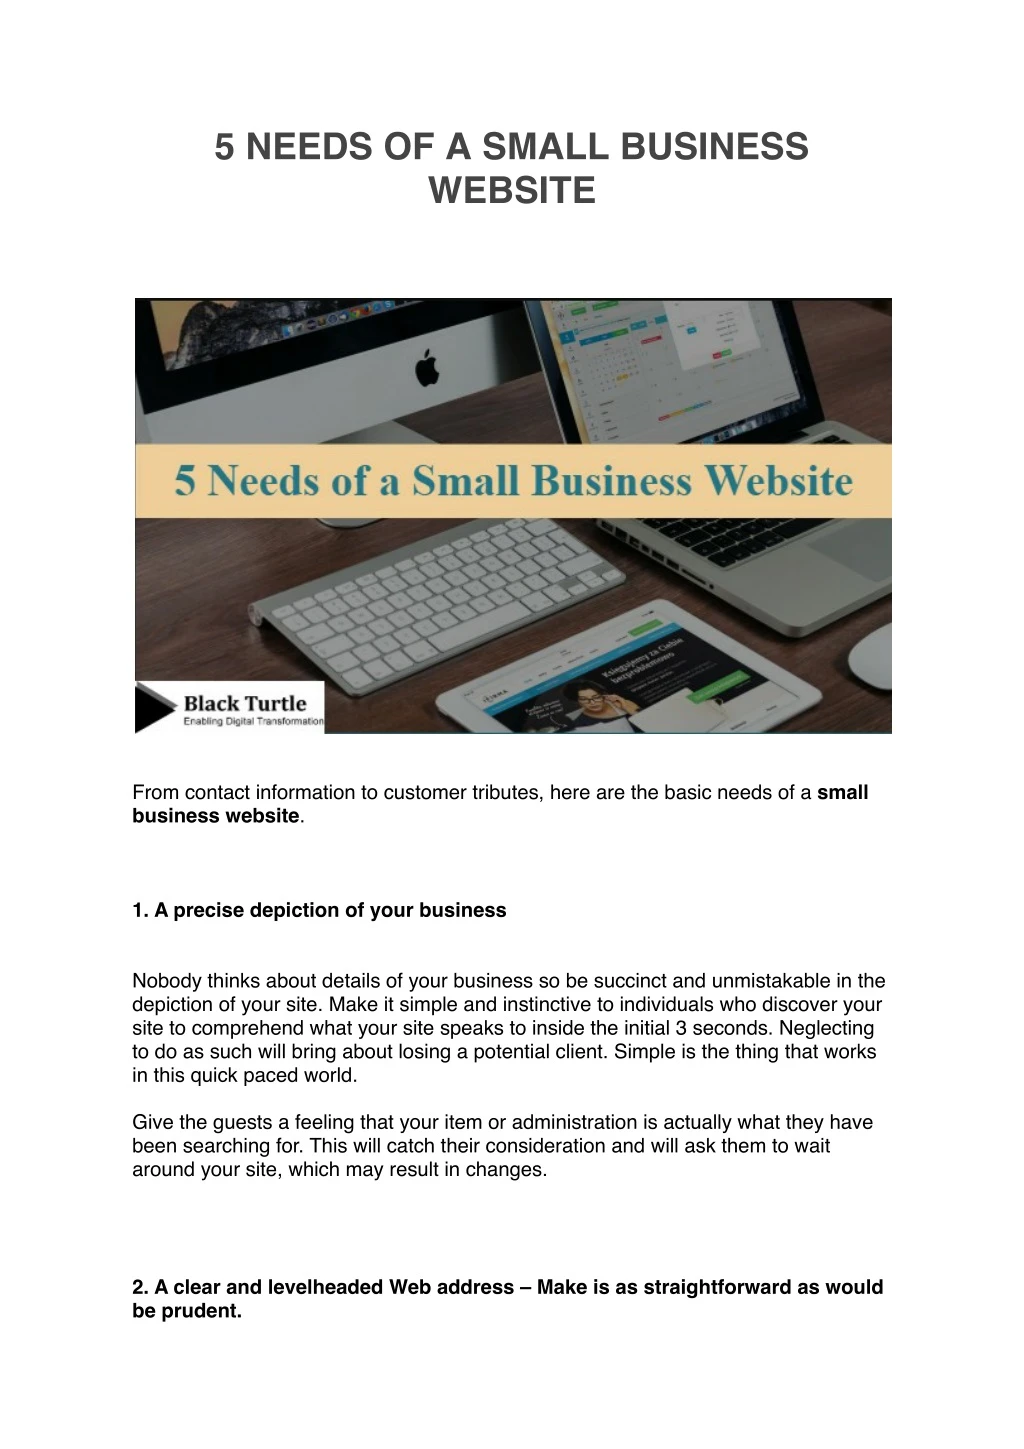 5 needs of a small business website